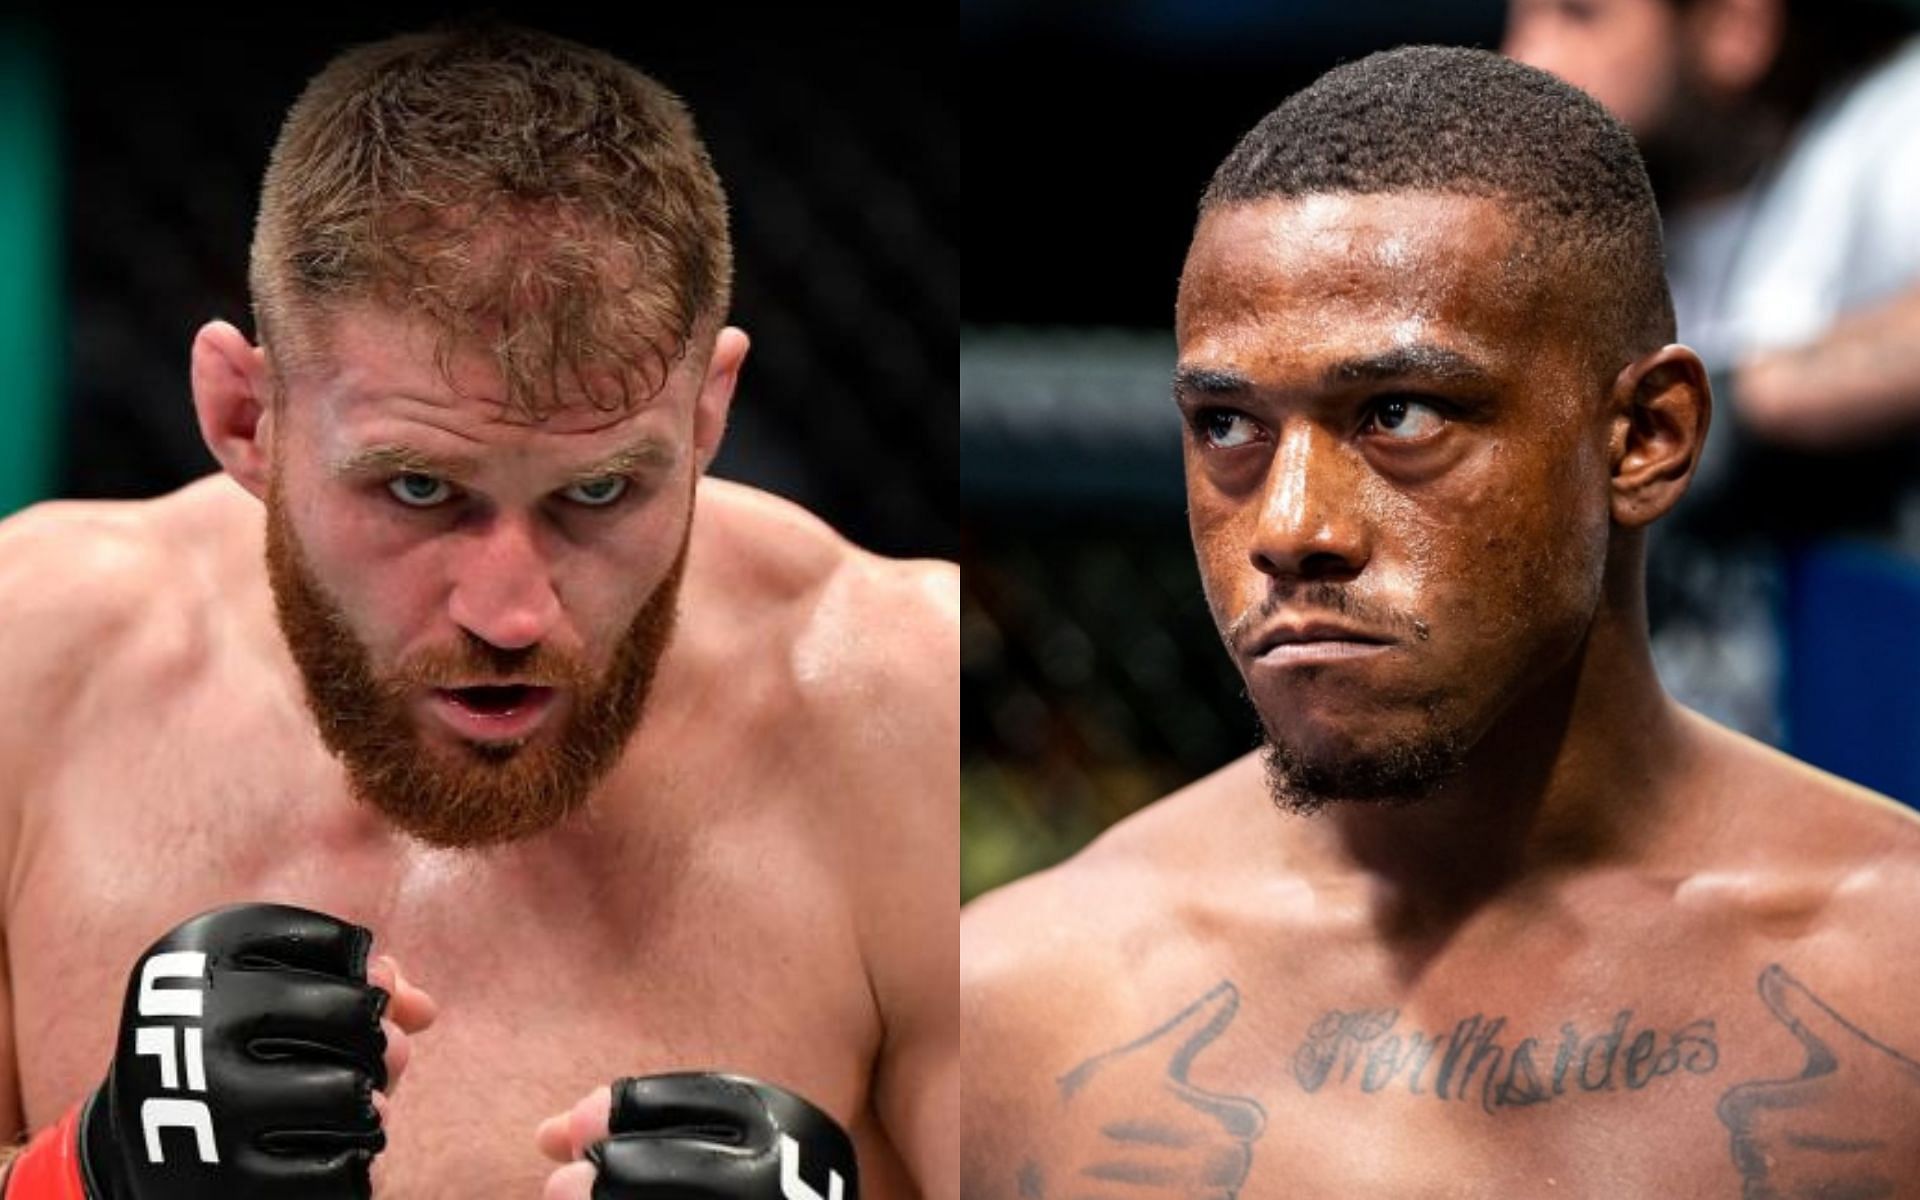 Jan Blachowicz (L) and Jamahal Hill (R) [ Image credits: UFC.com and @ufc /Instagram ]